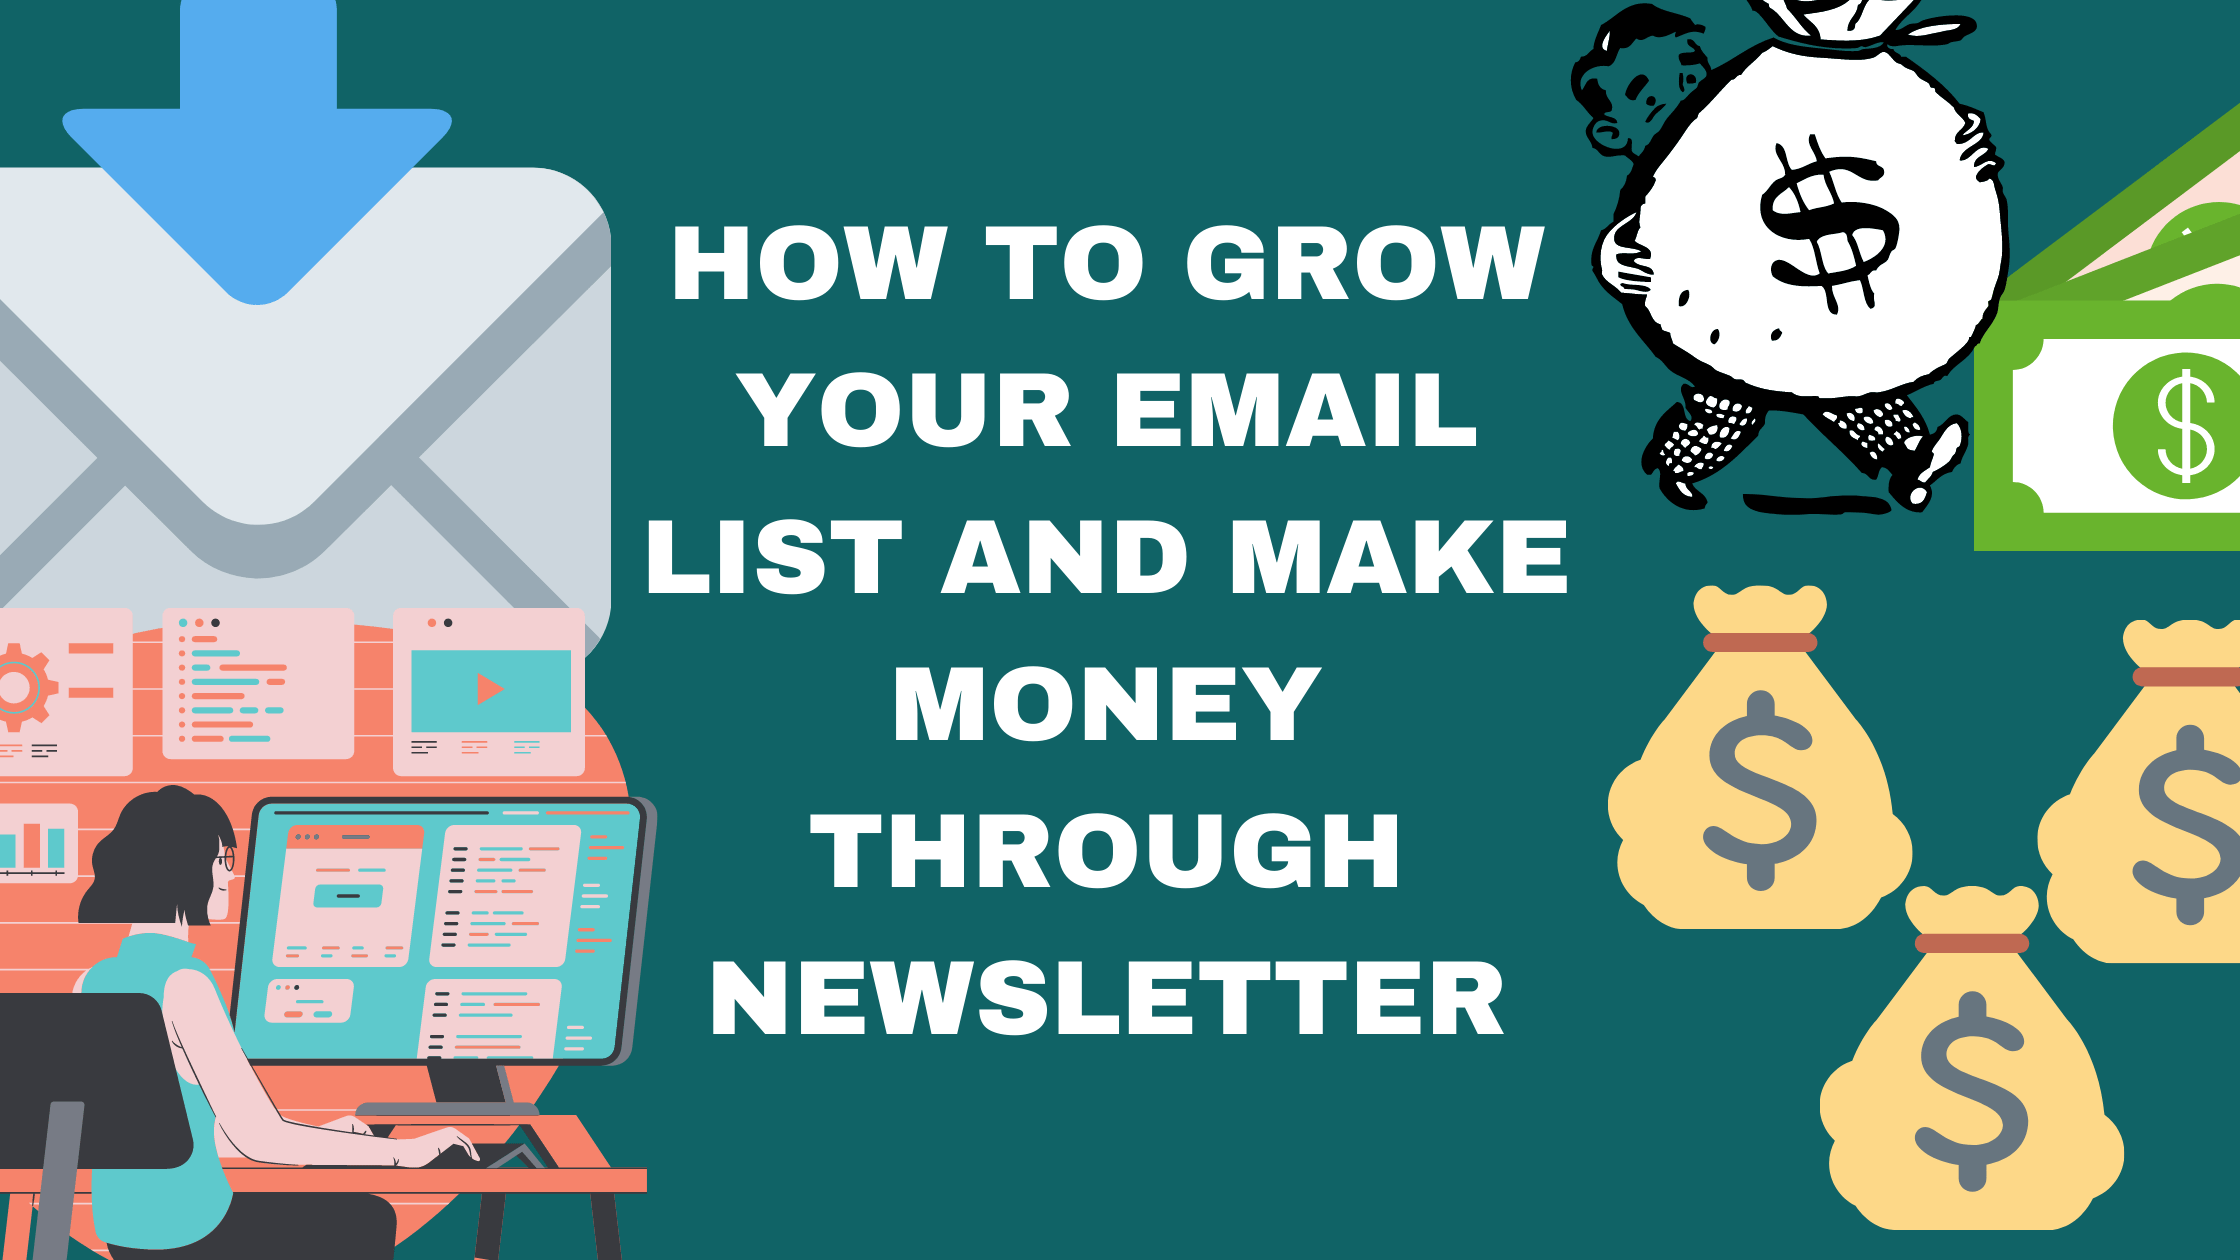 How To Grow Your Email List And Make Money Through Newsletter